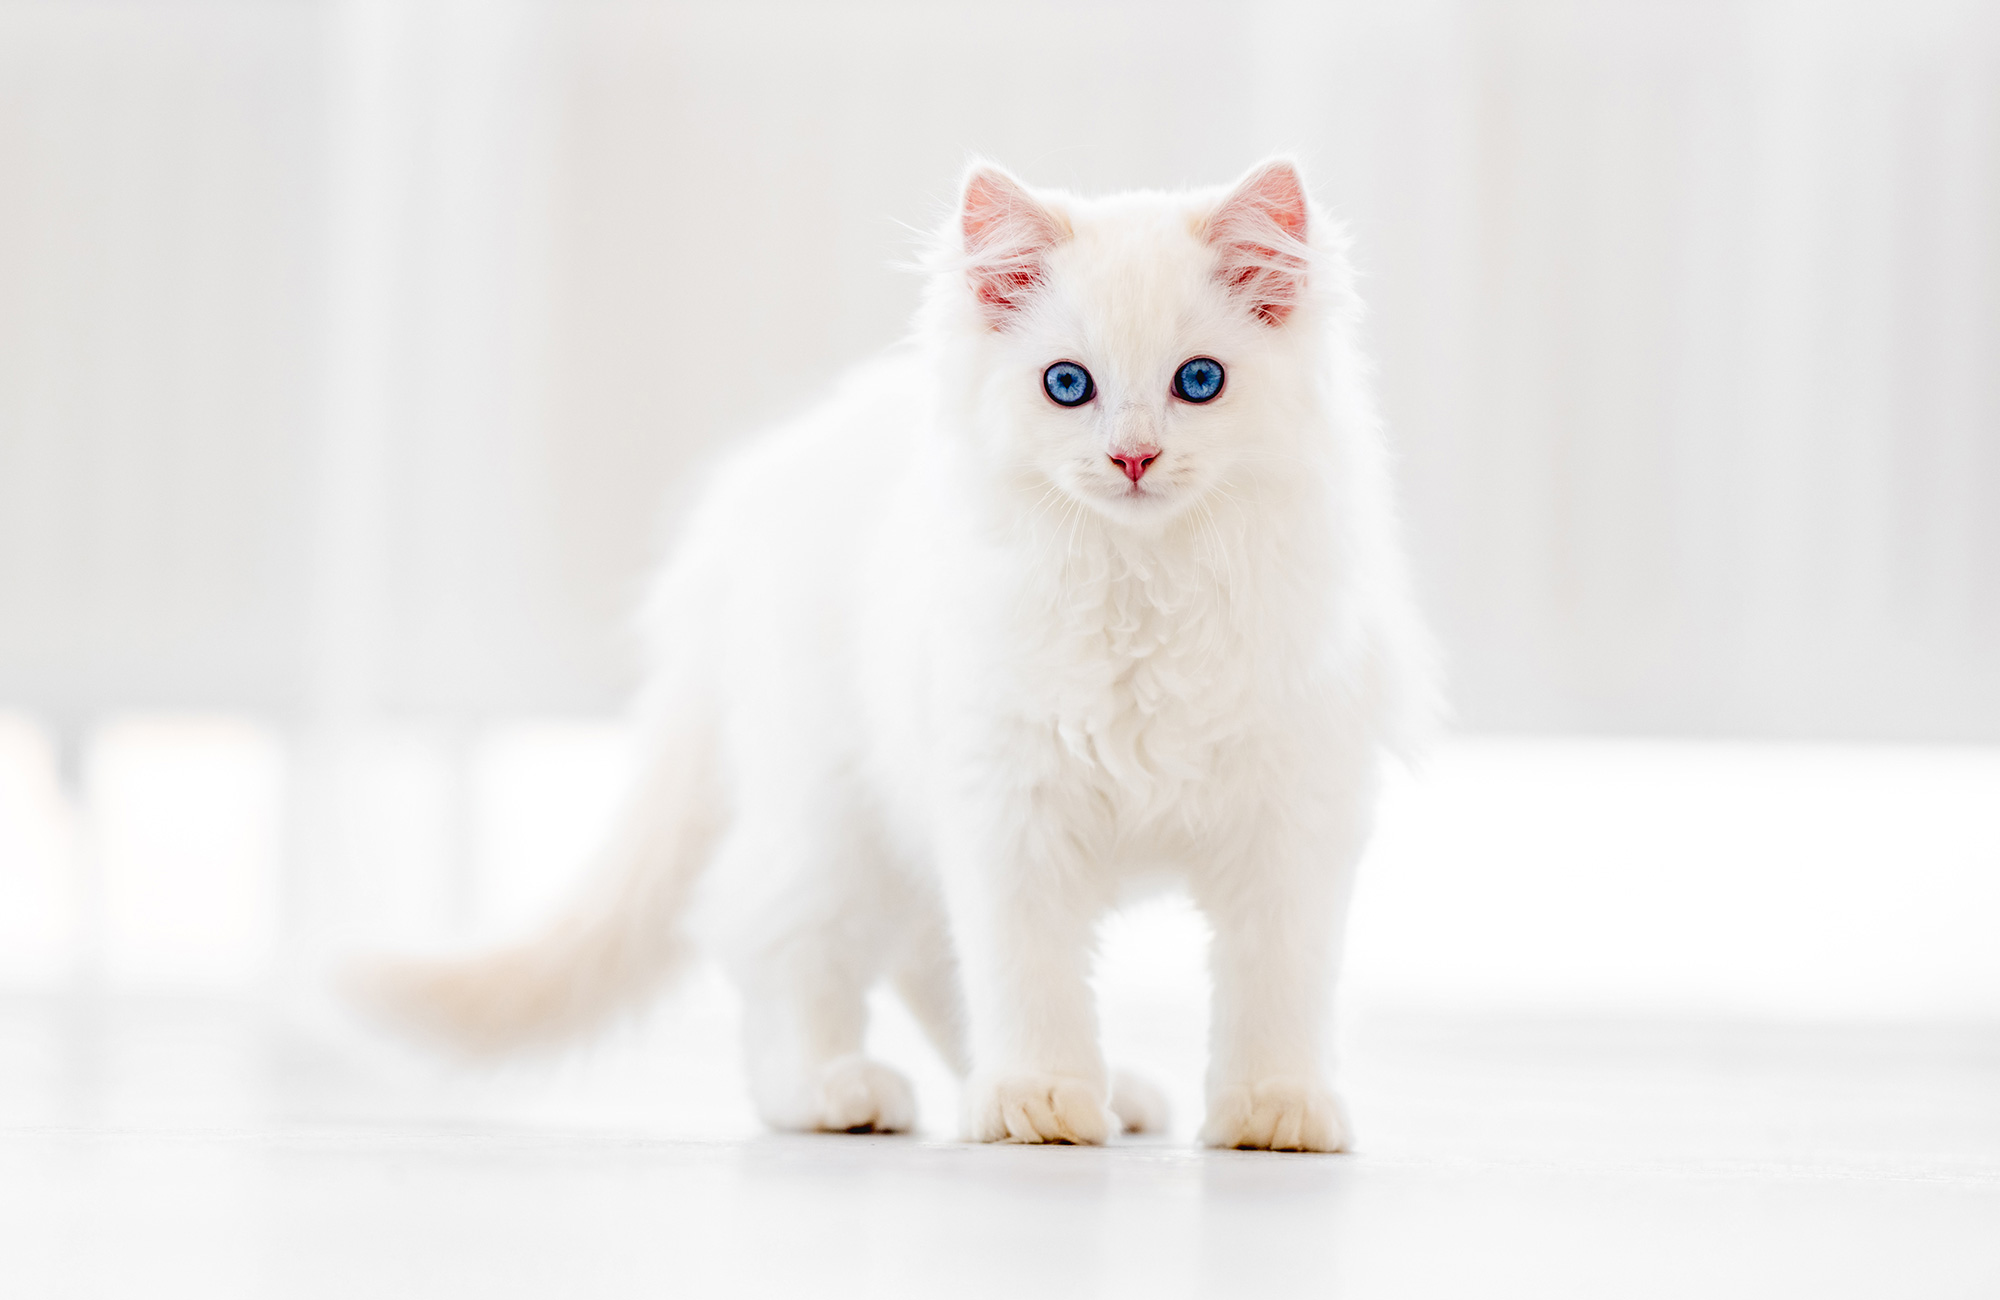 What Does It Mean When You Dream About a White Cat?